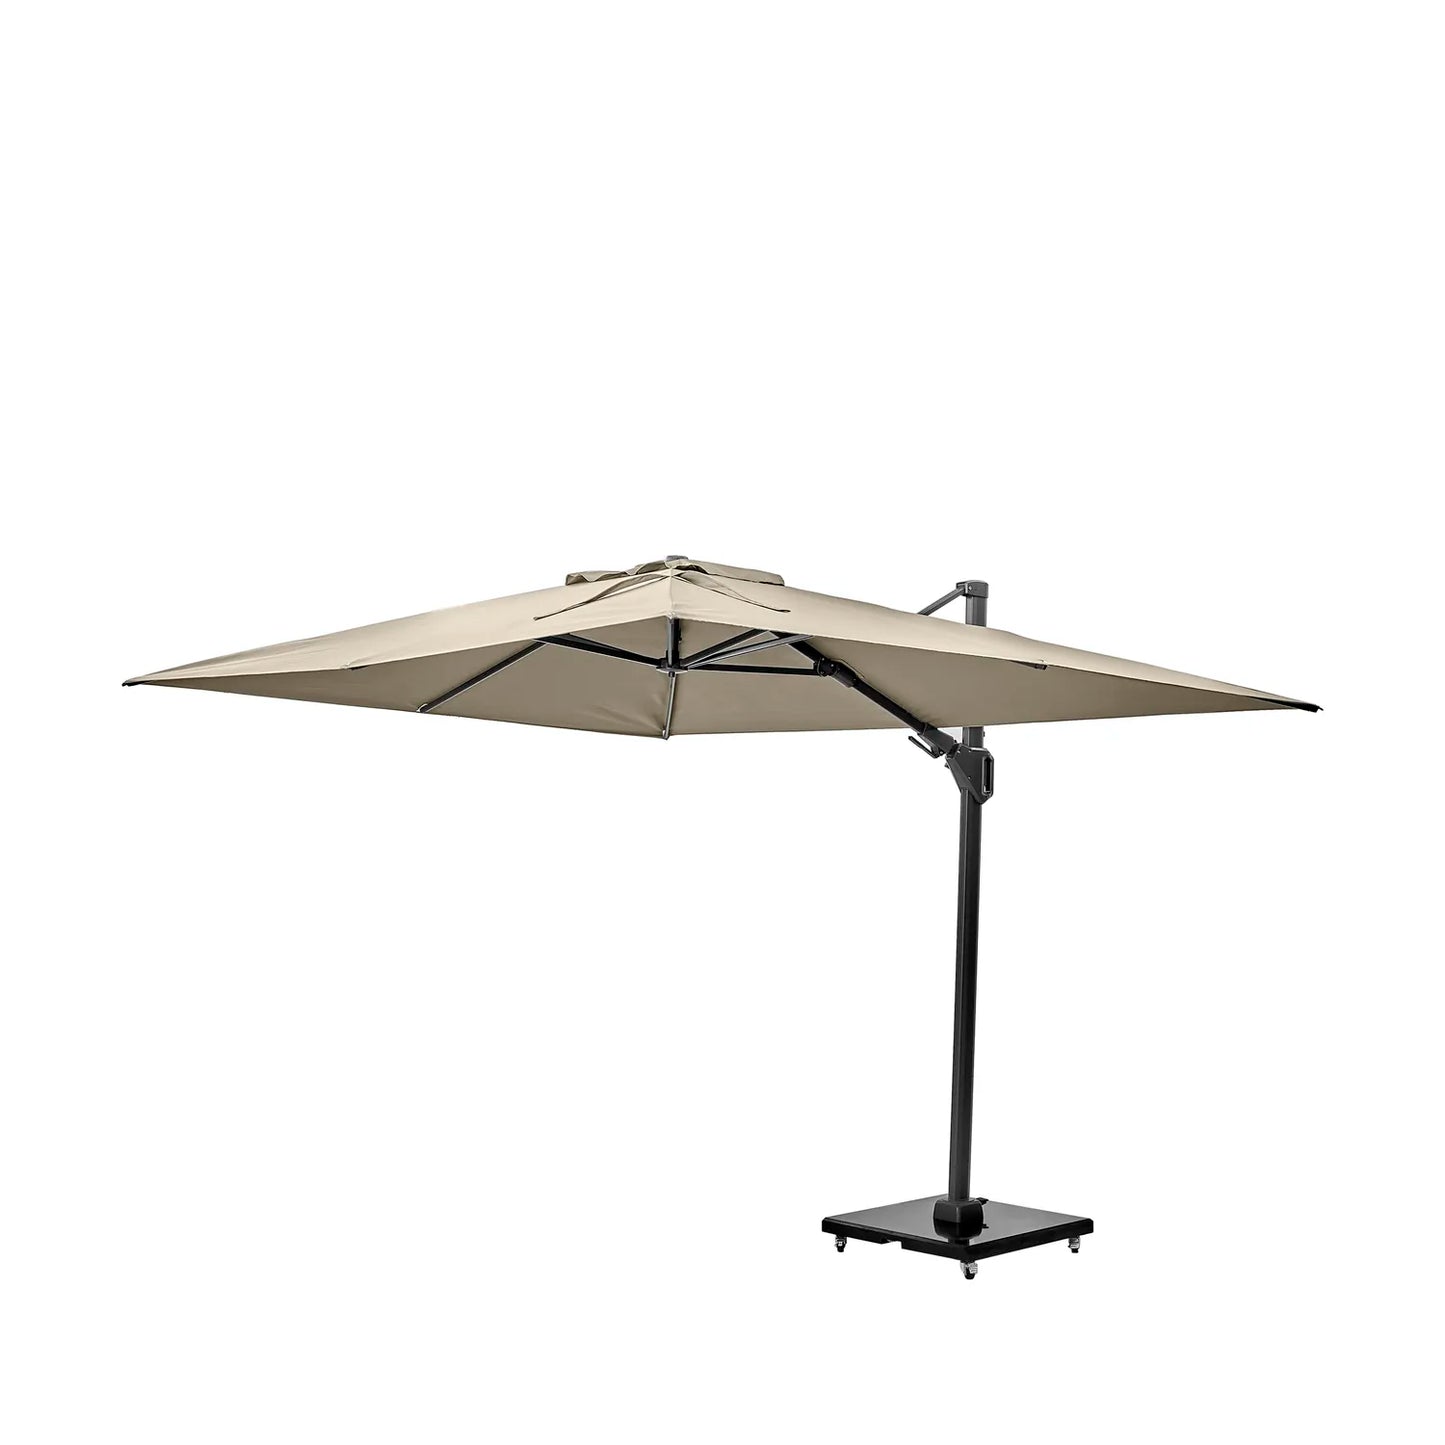 Platinum Challenger T2 3.5x2.6m Oblong Cantilever Parasol in Champagne – Click Style